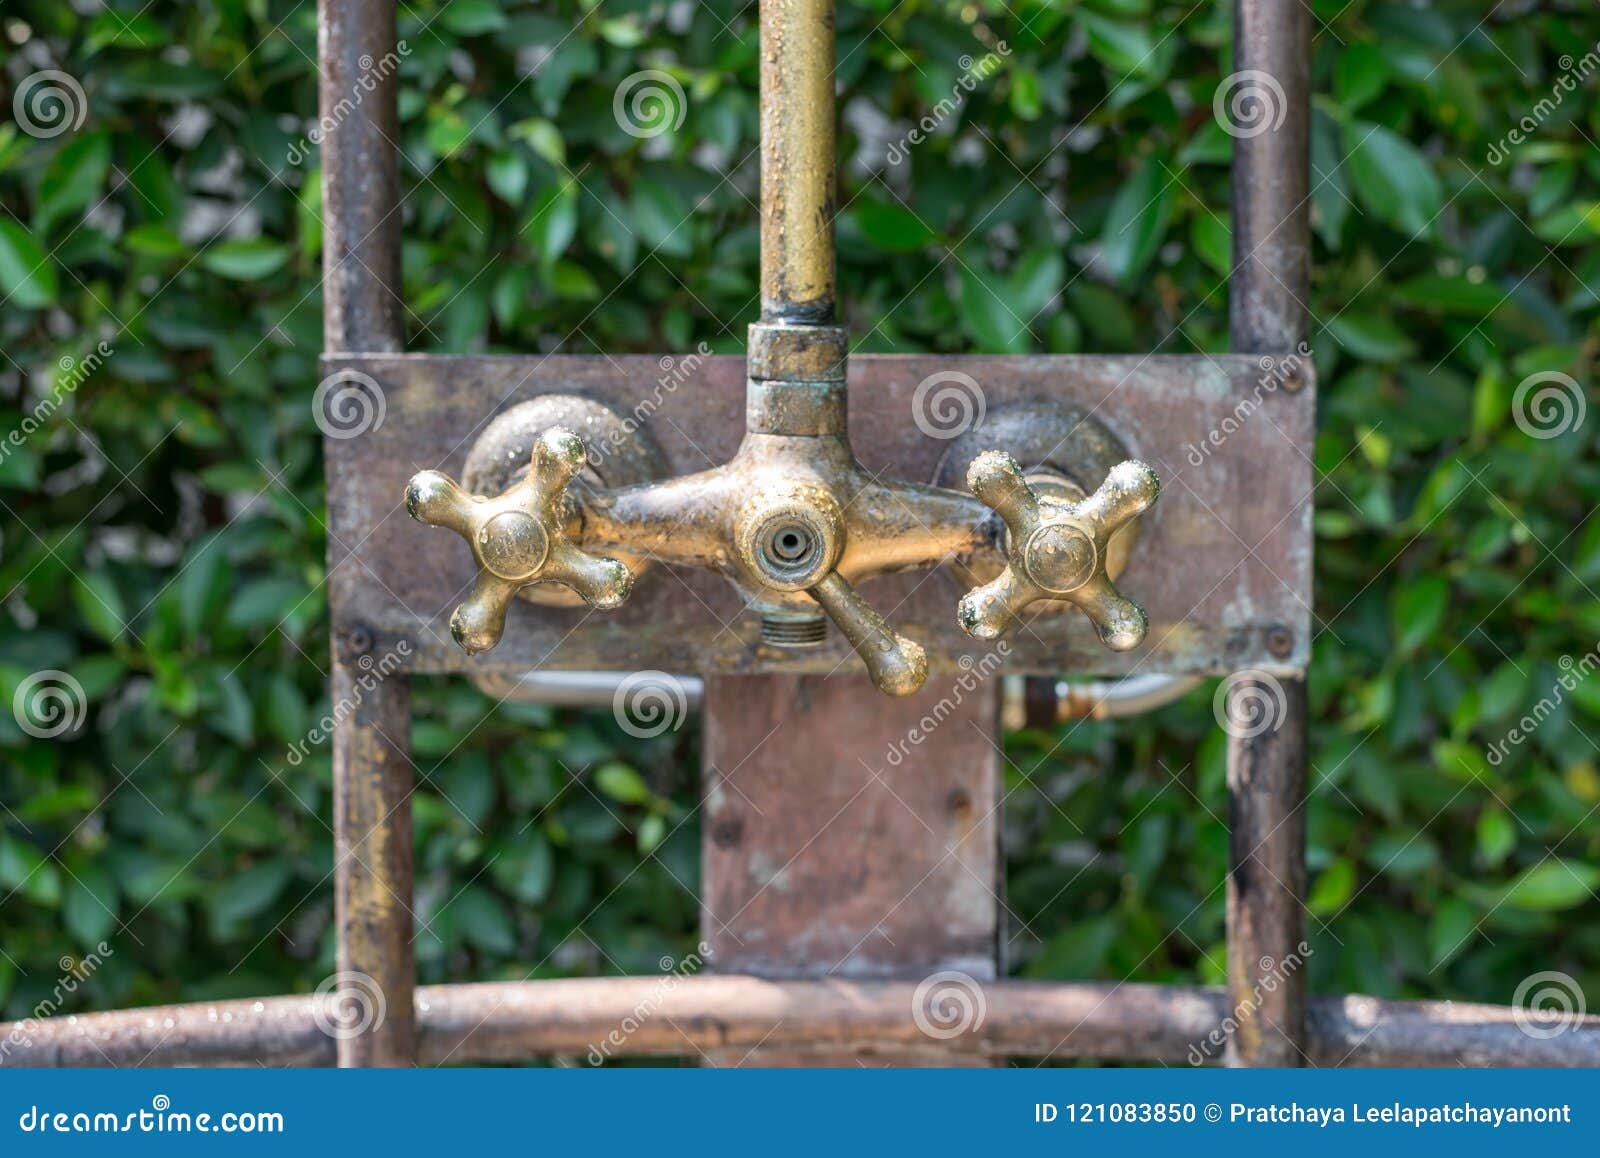 Vintage Bronze Shower Faucet Of Hot And Cold Water Stock Photo